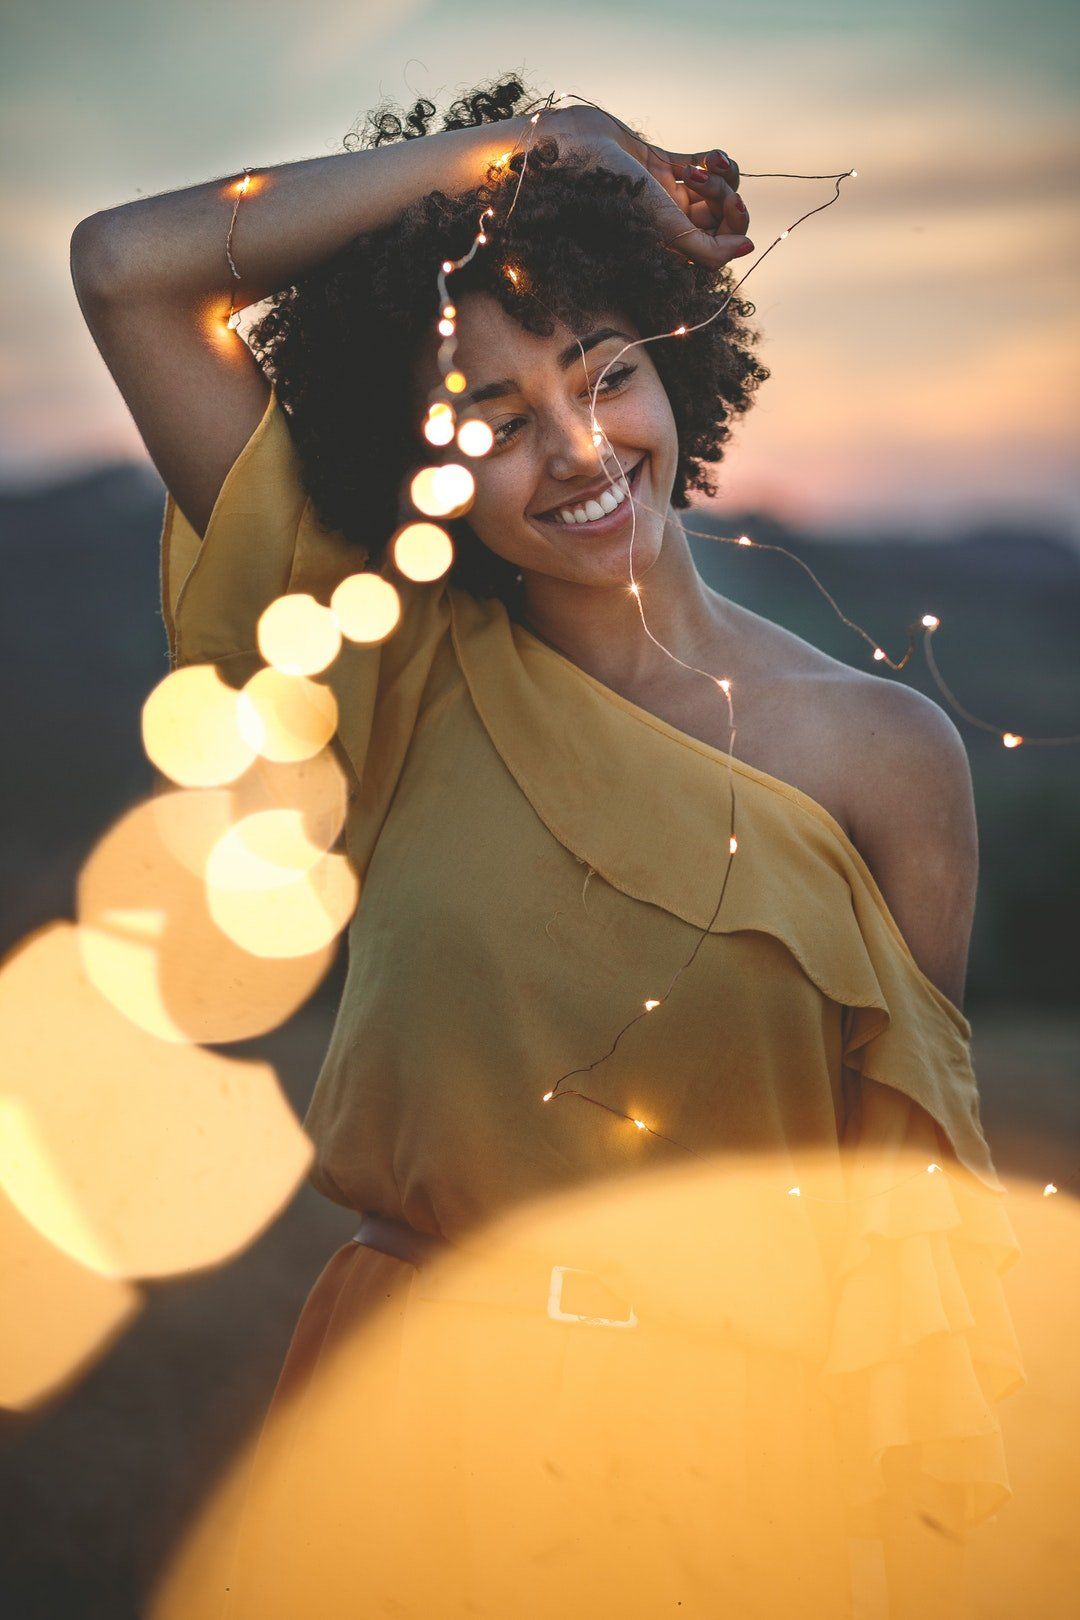 woman with dark curly hair and whitened teeth smiling and holding stringy lights